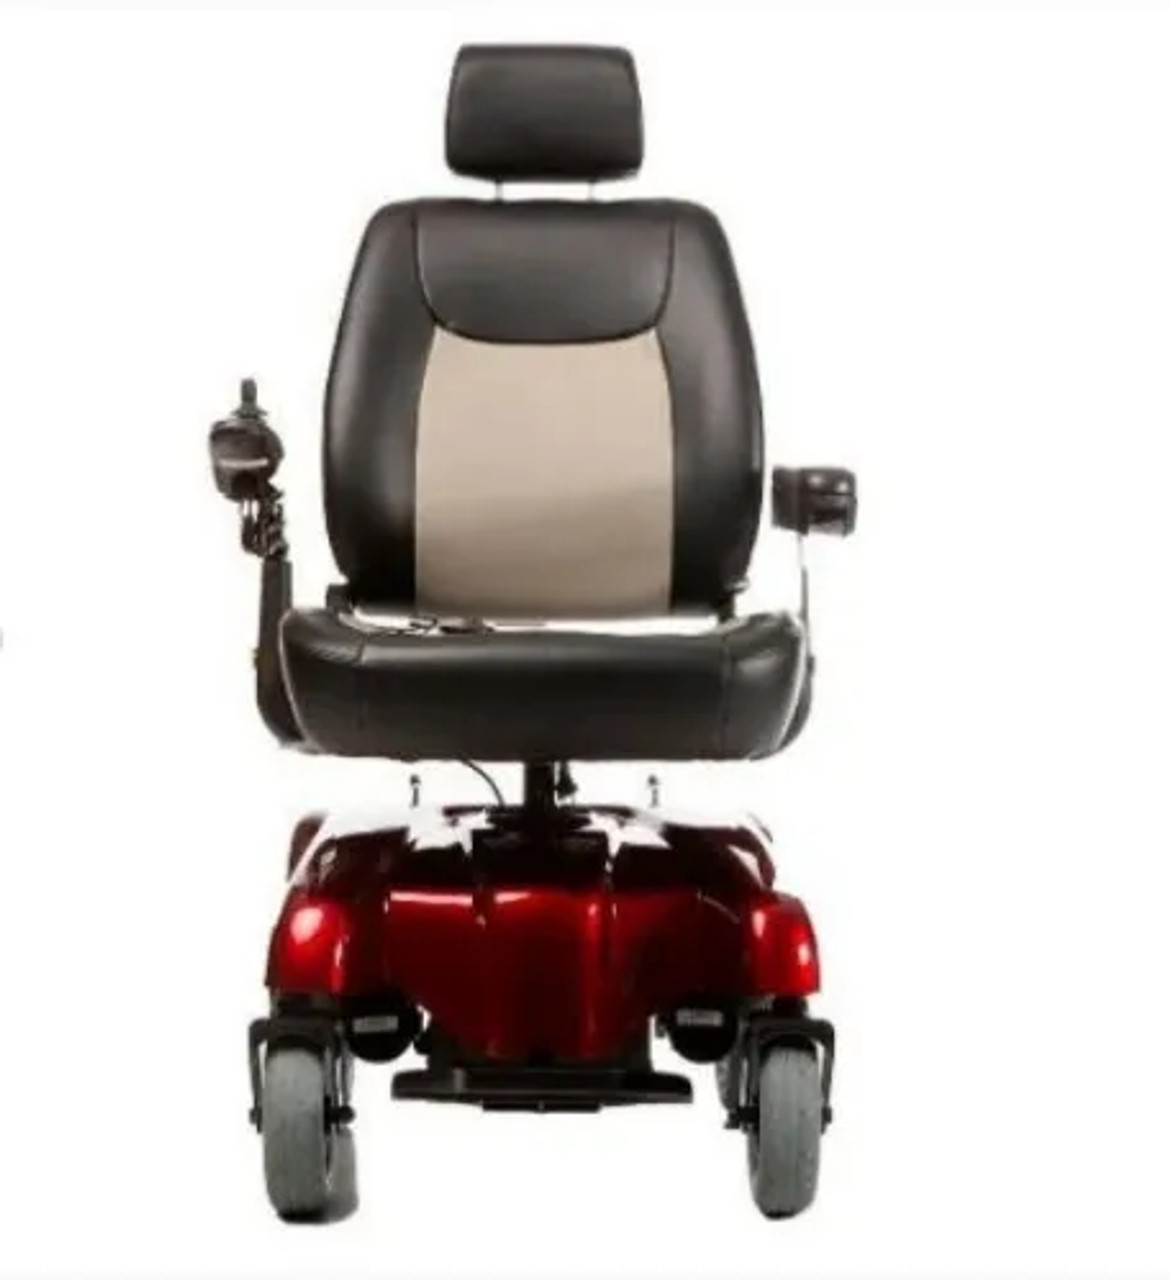 Gemini Power Wheelchair with Elevating Captain Seat by Merits - Swivel, Fold-Chicken Pieces